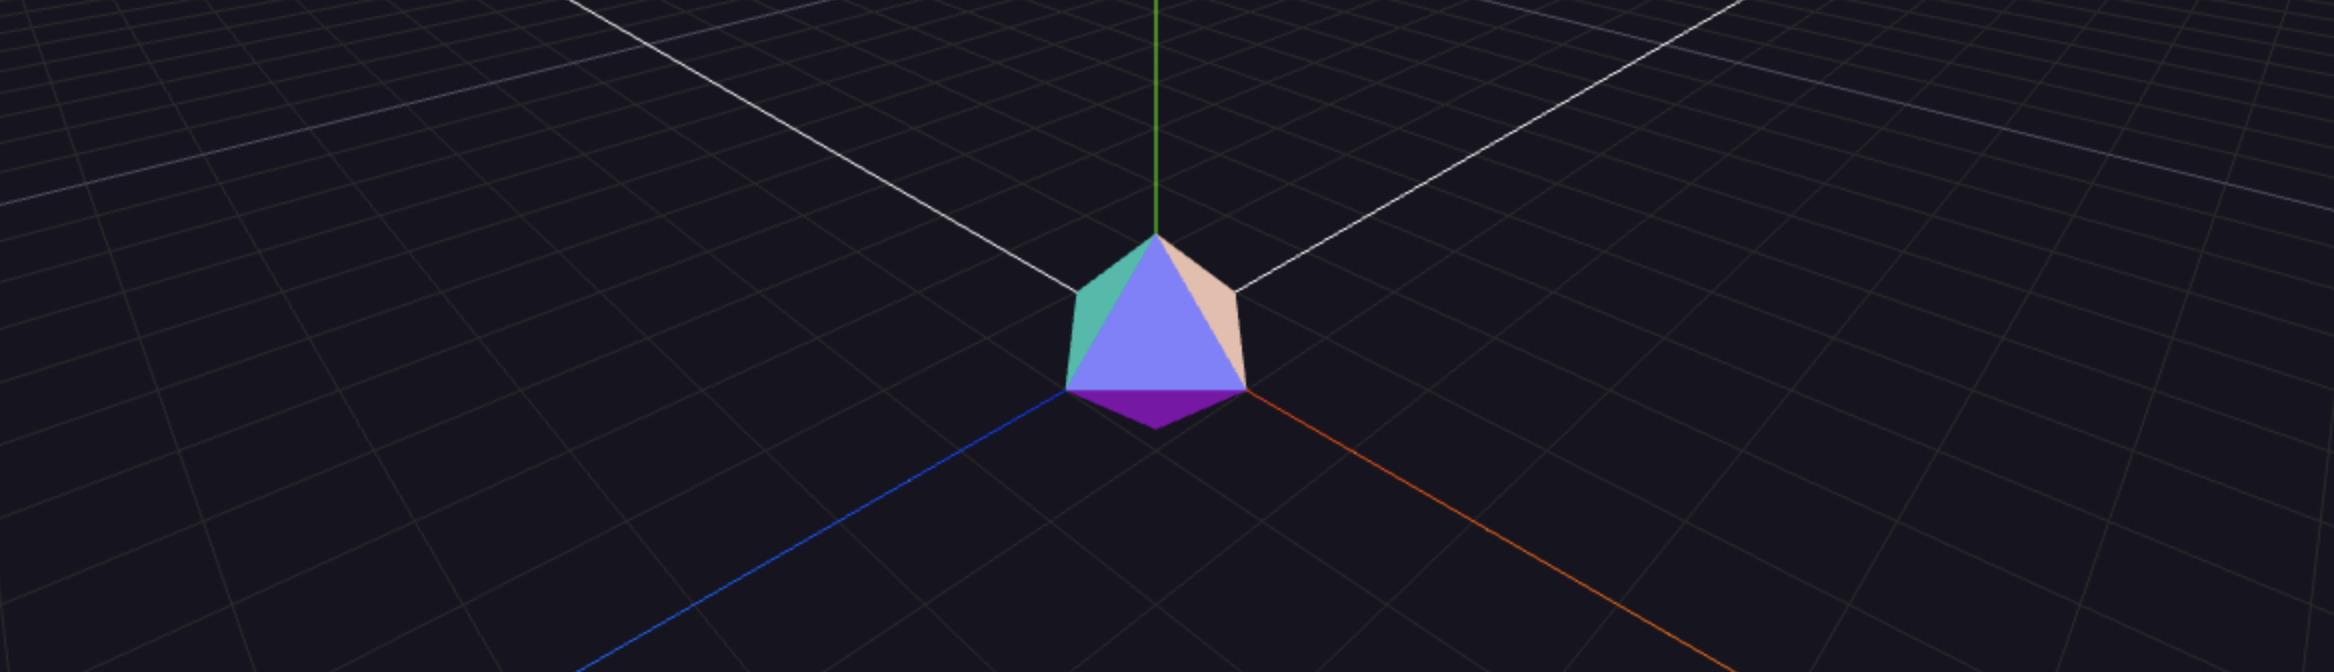 A grid and an octahedron with normal material